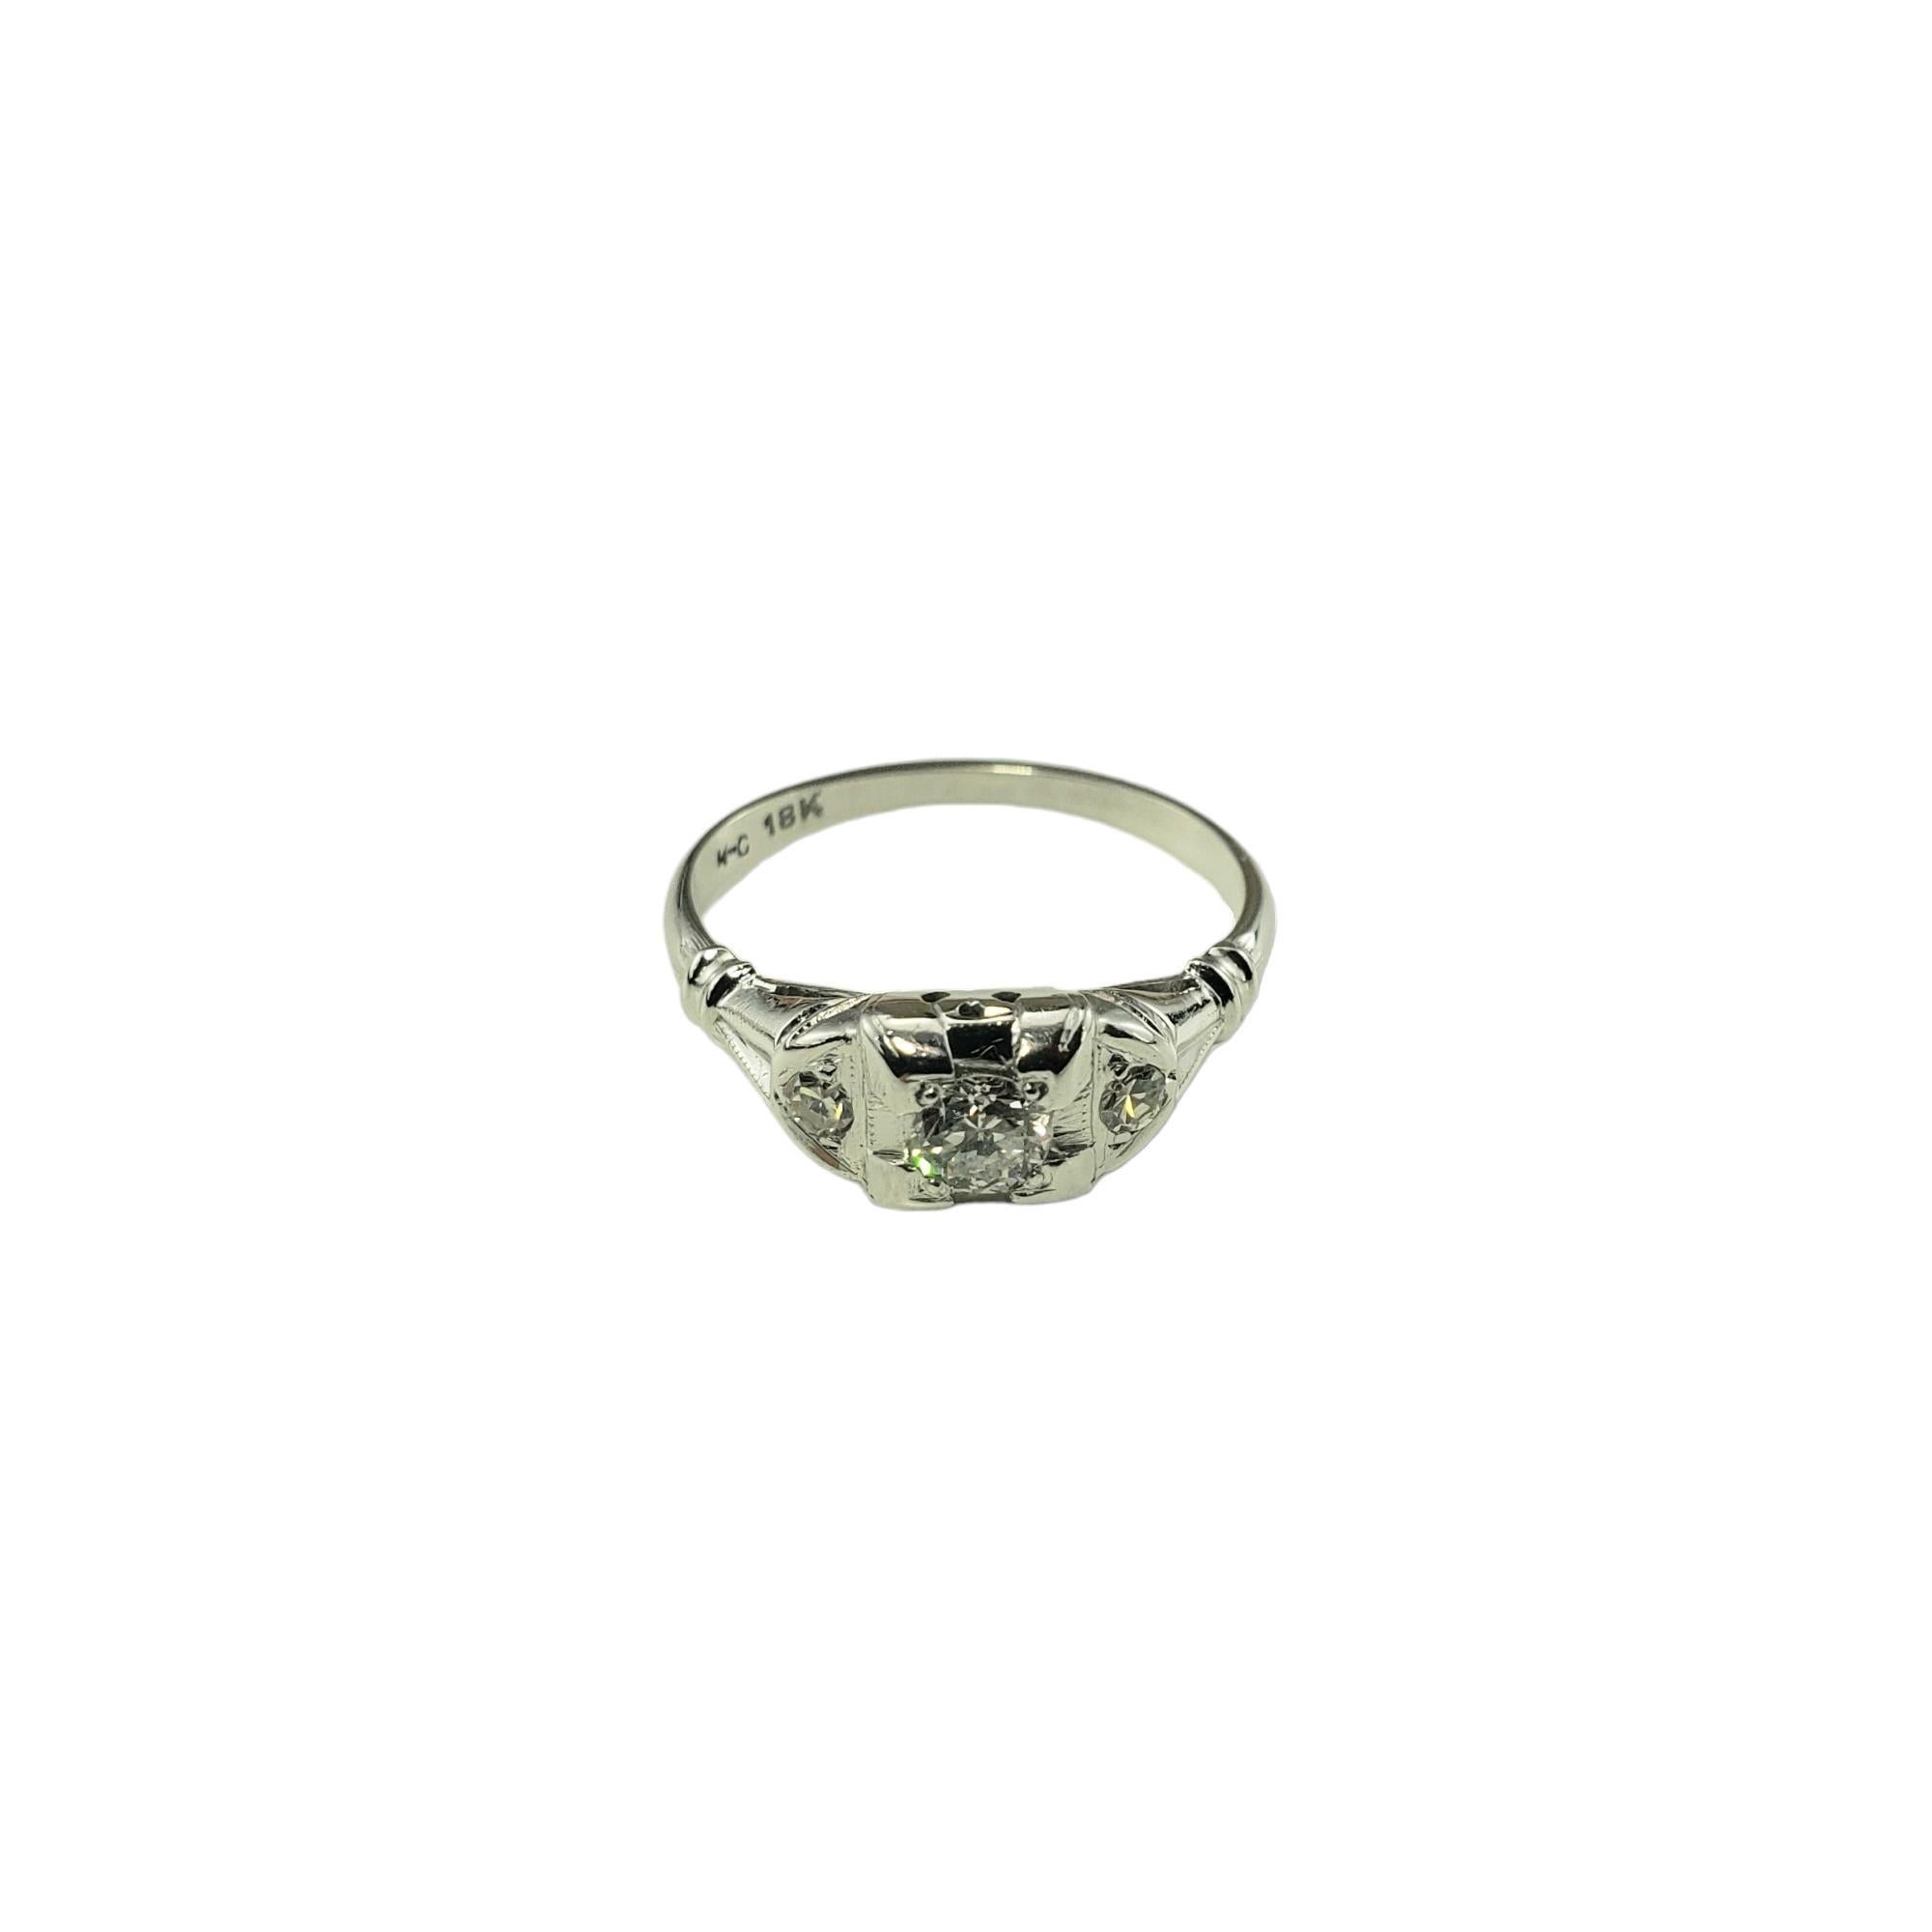 18 Karat White Gold Diamond Engagement Ring Size 6-

This sparkling ring features one center round brilliant cut diamond (.18 ct.) and two round single cut diamonds set in classic 18K white gold.  Width:  6 mm.  
Shank:  1.4 mm.

Approximate total